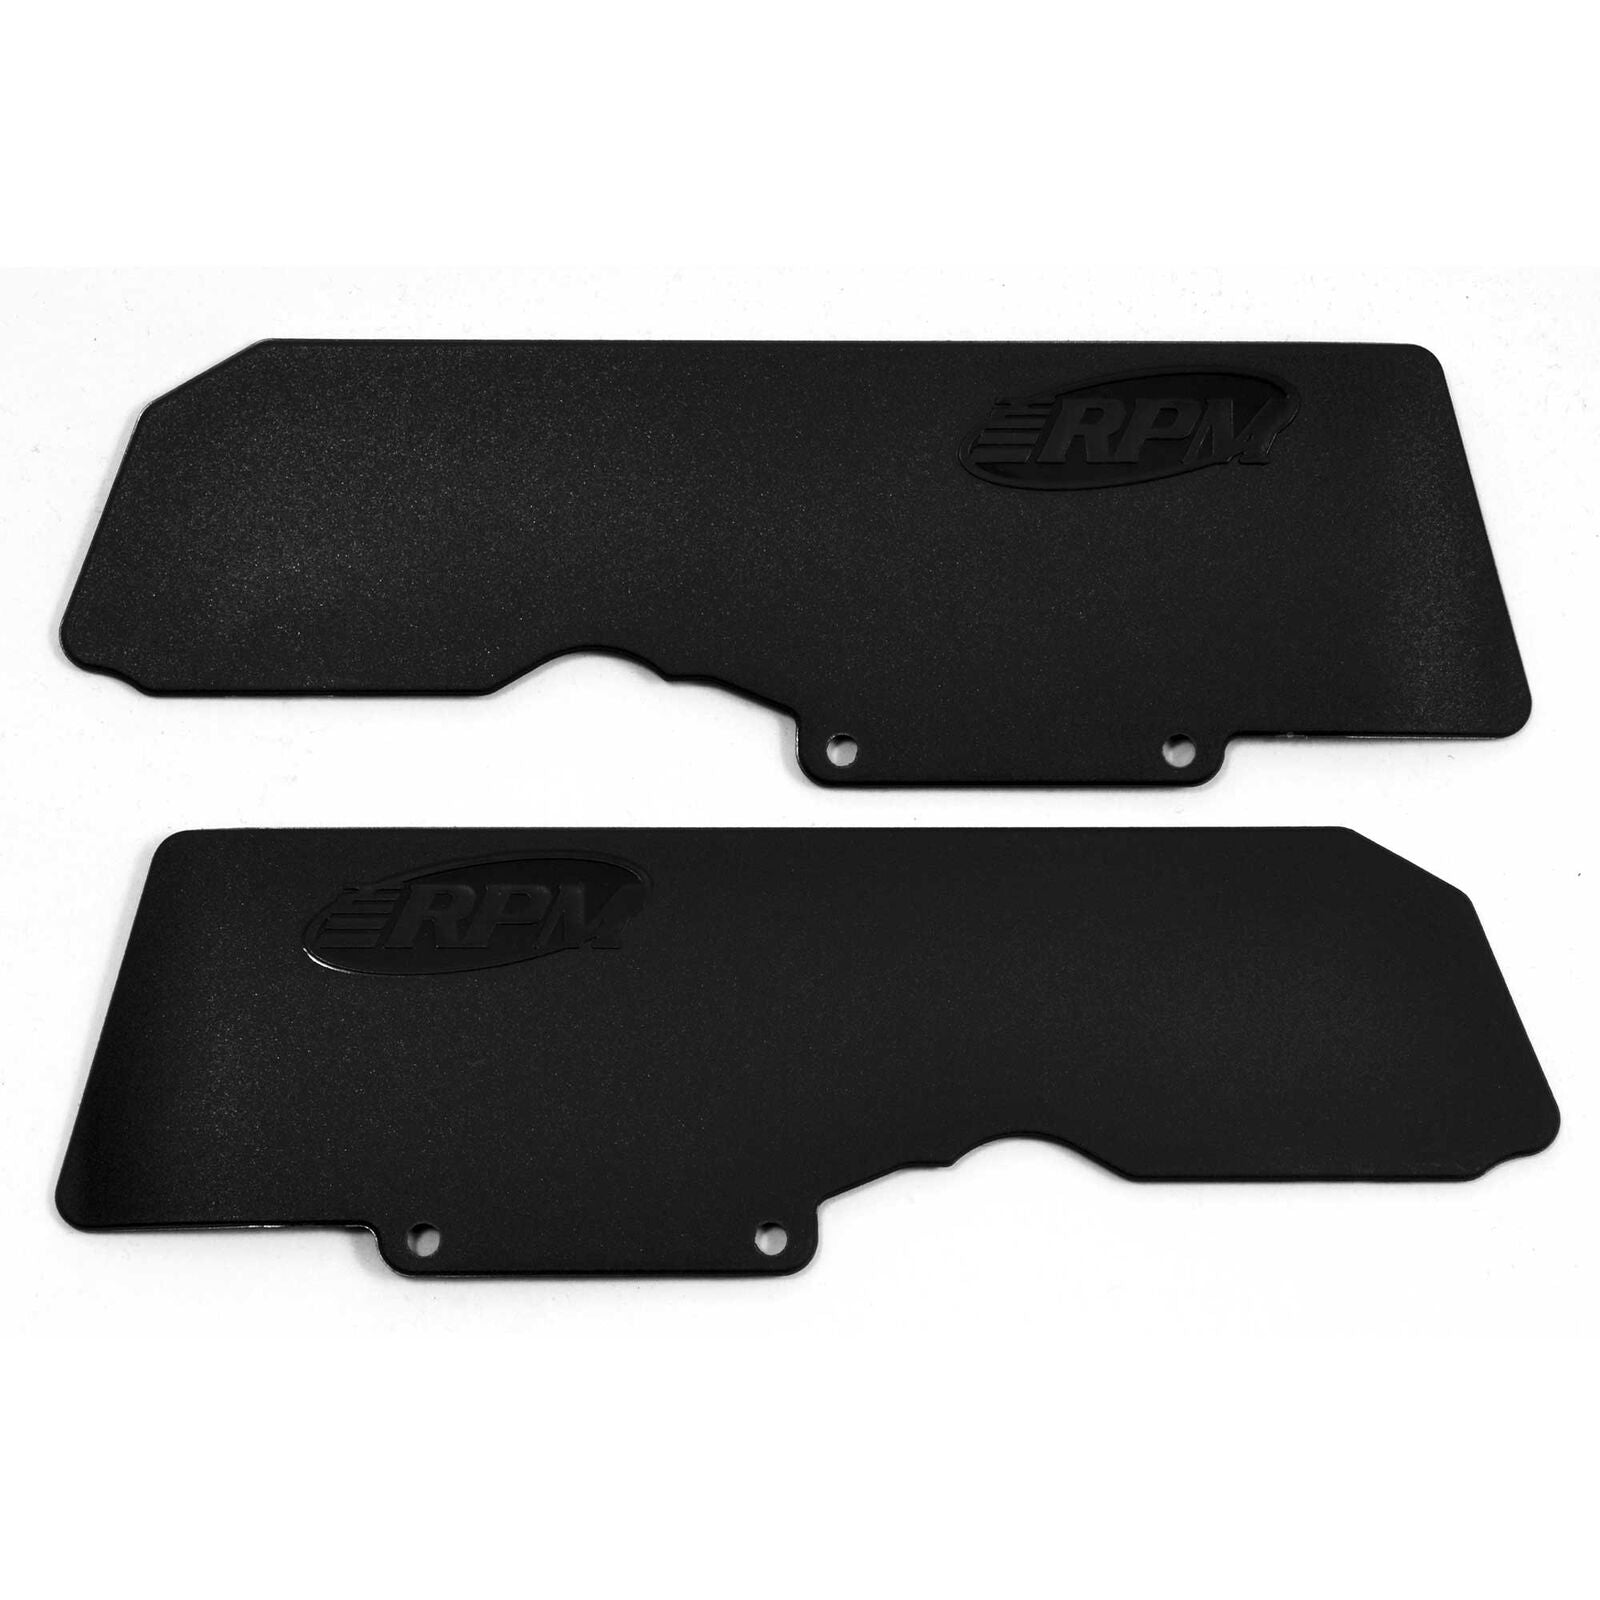 RPM 81532 RPM Mud Guards for Rear A-arms (2): Black